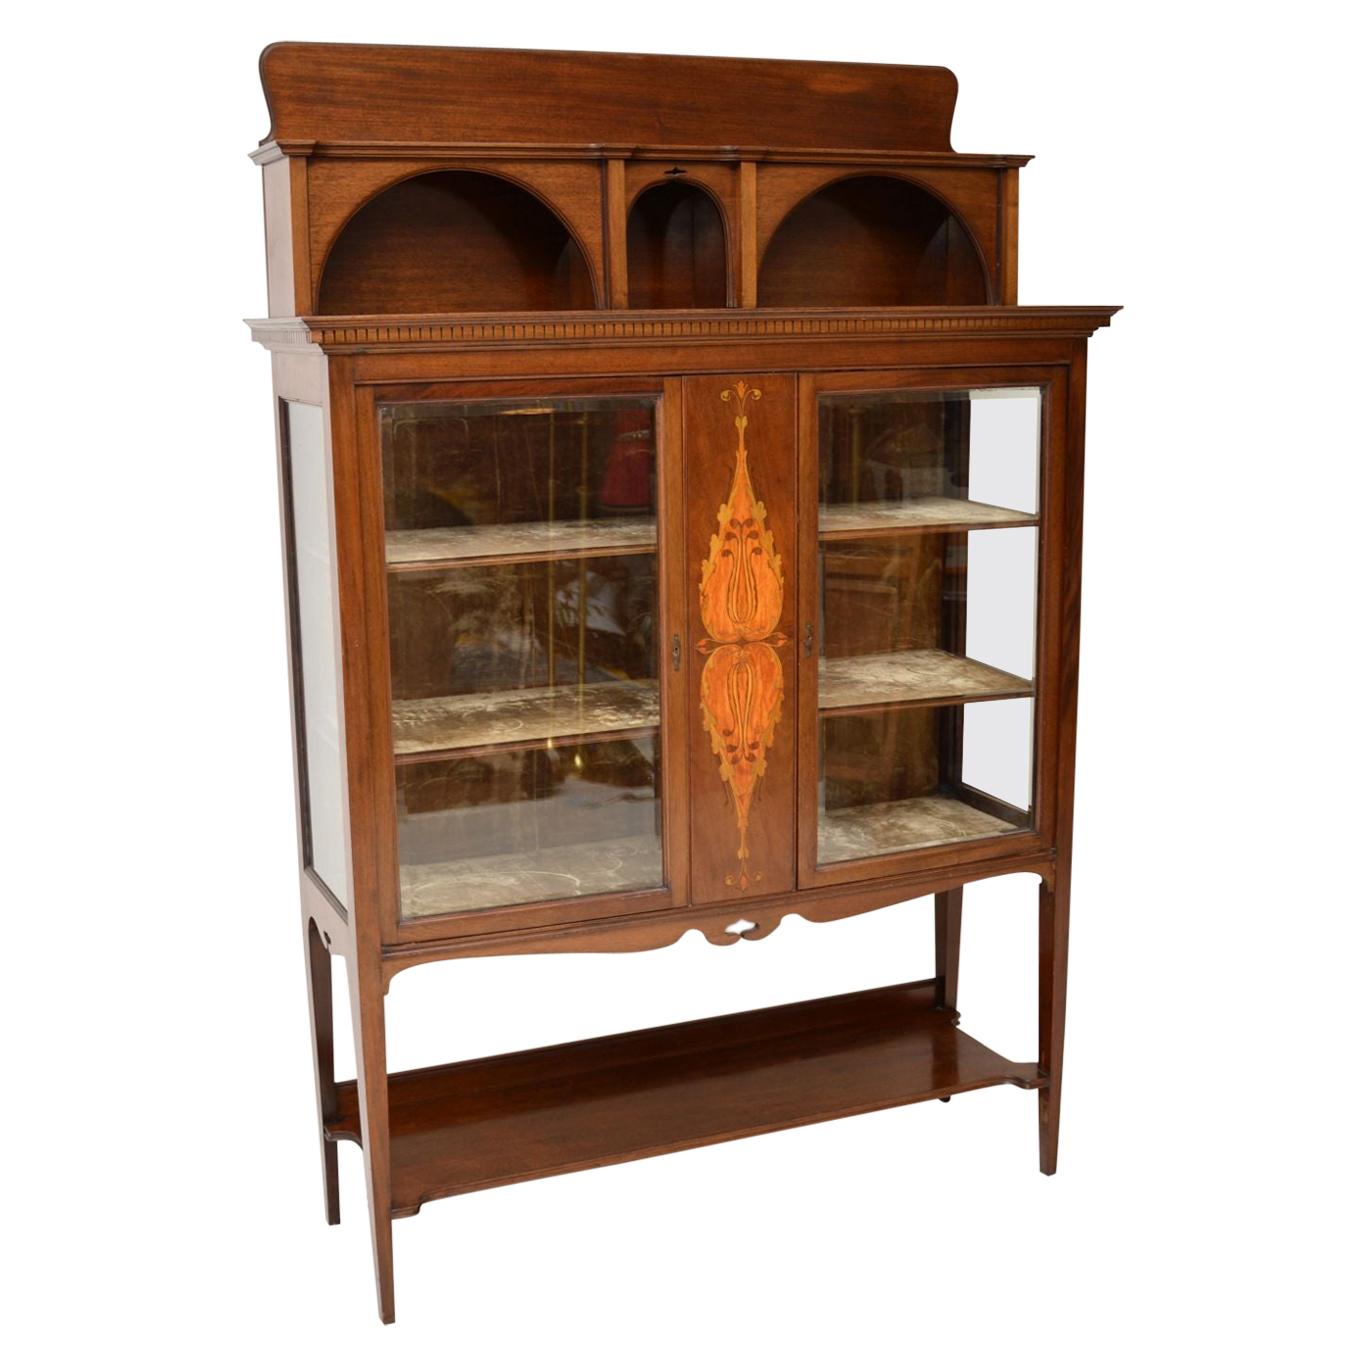 This antique Arts & Crafts mahogany display cabinet was bought from Liberty in 1991 for £2750 & we still have the original receipt which we have show in one of the images. It’s totally original & still in very good condition, right down to the